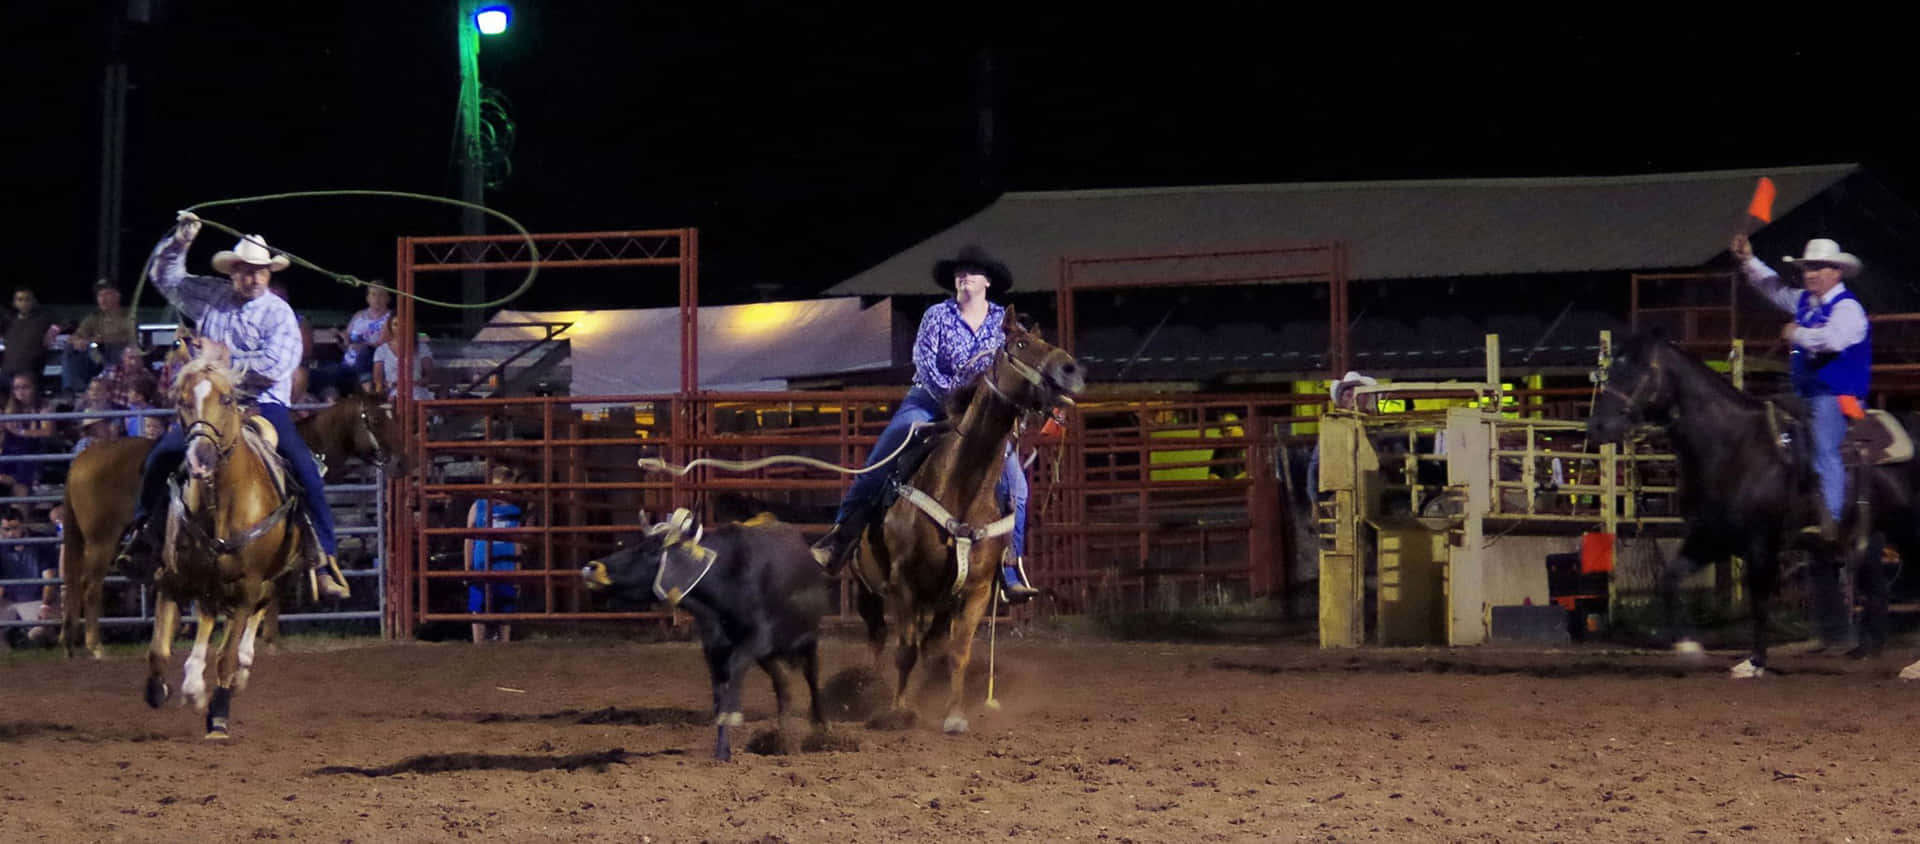 "Bucking broncos and daredevil riders: a real-life rodeo experience"